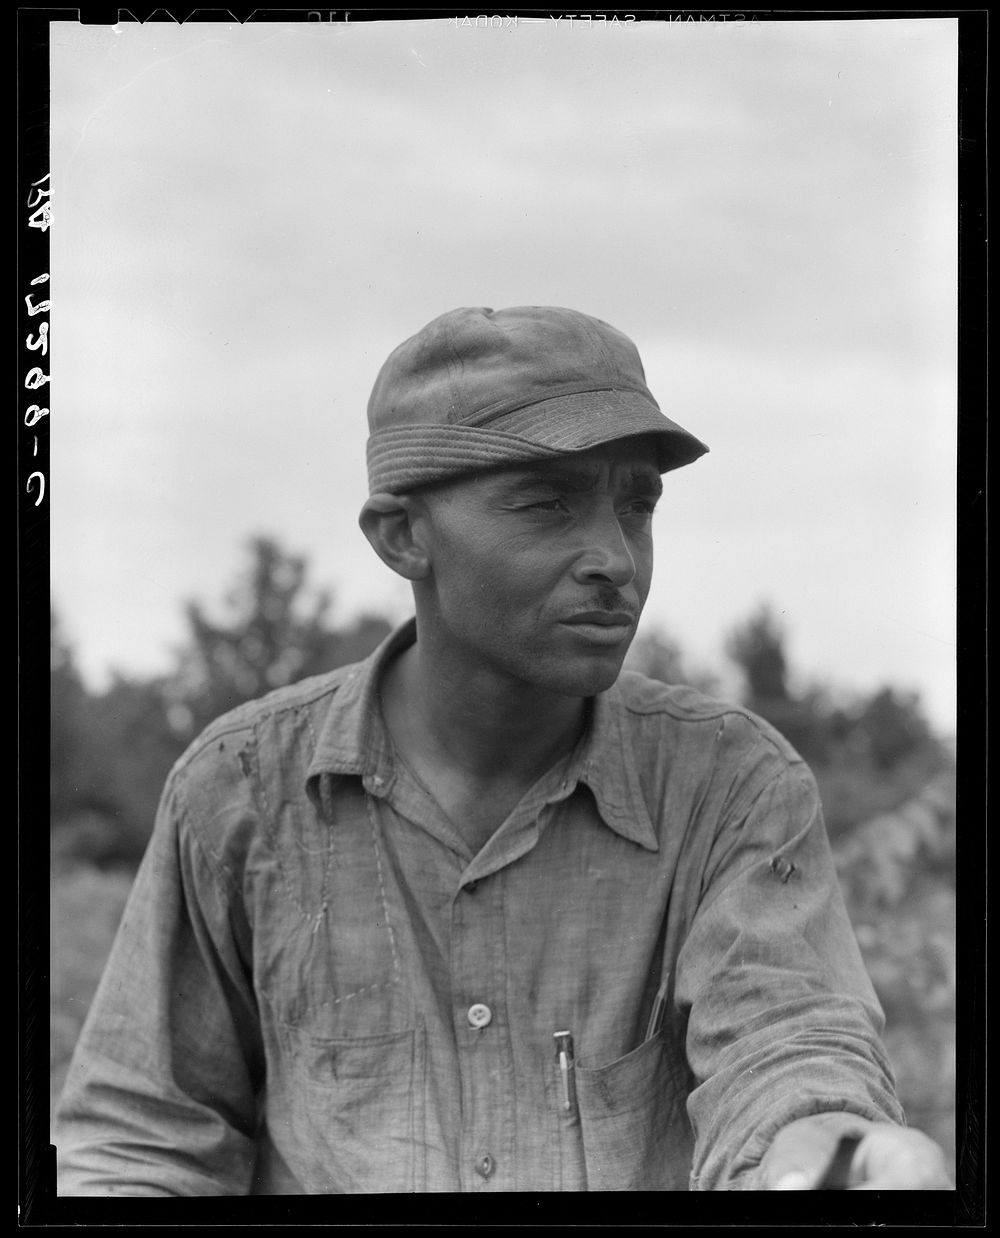 Member of the Delta cooperative farm at Hillhouse, Mississippi. Sourced from the Library of Congress.